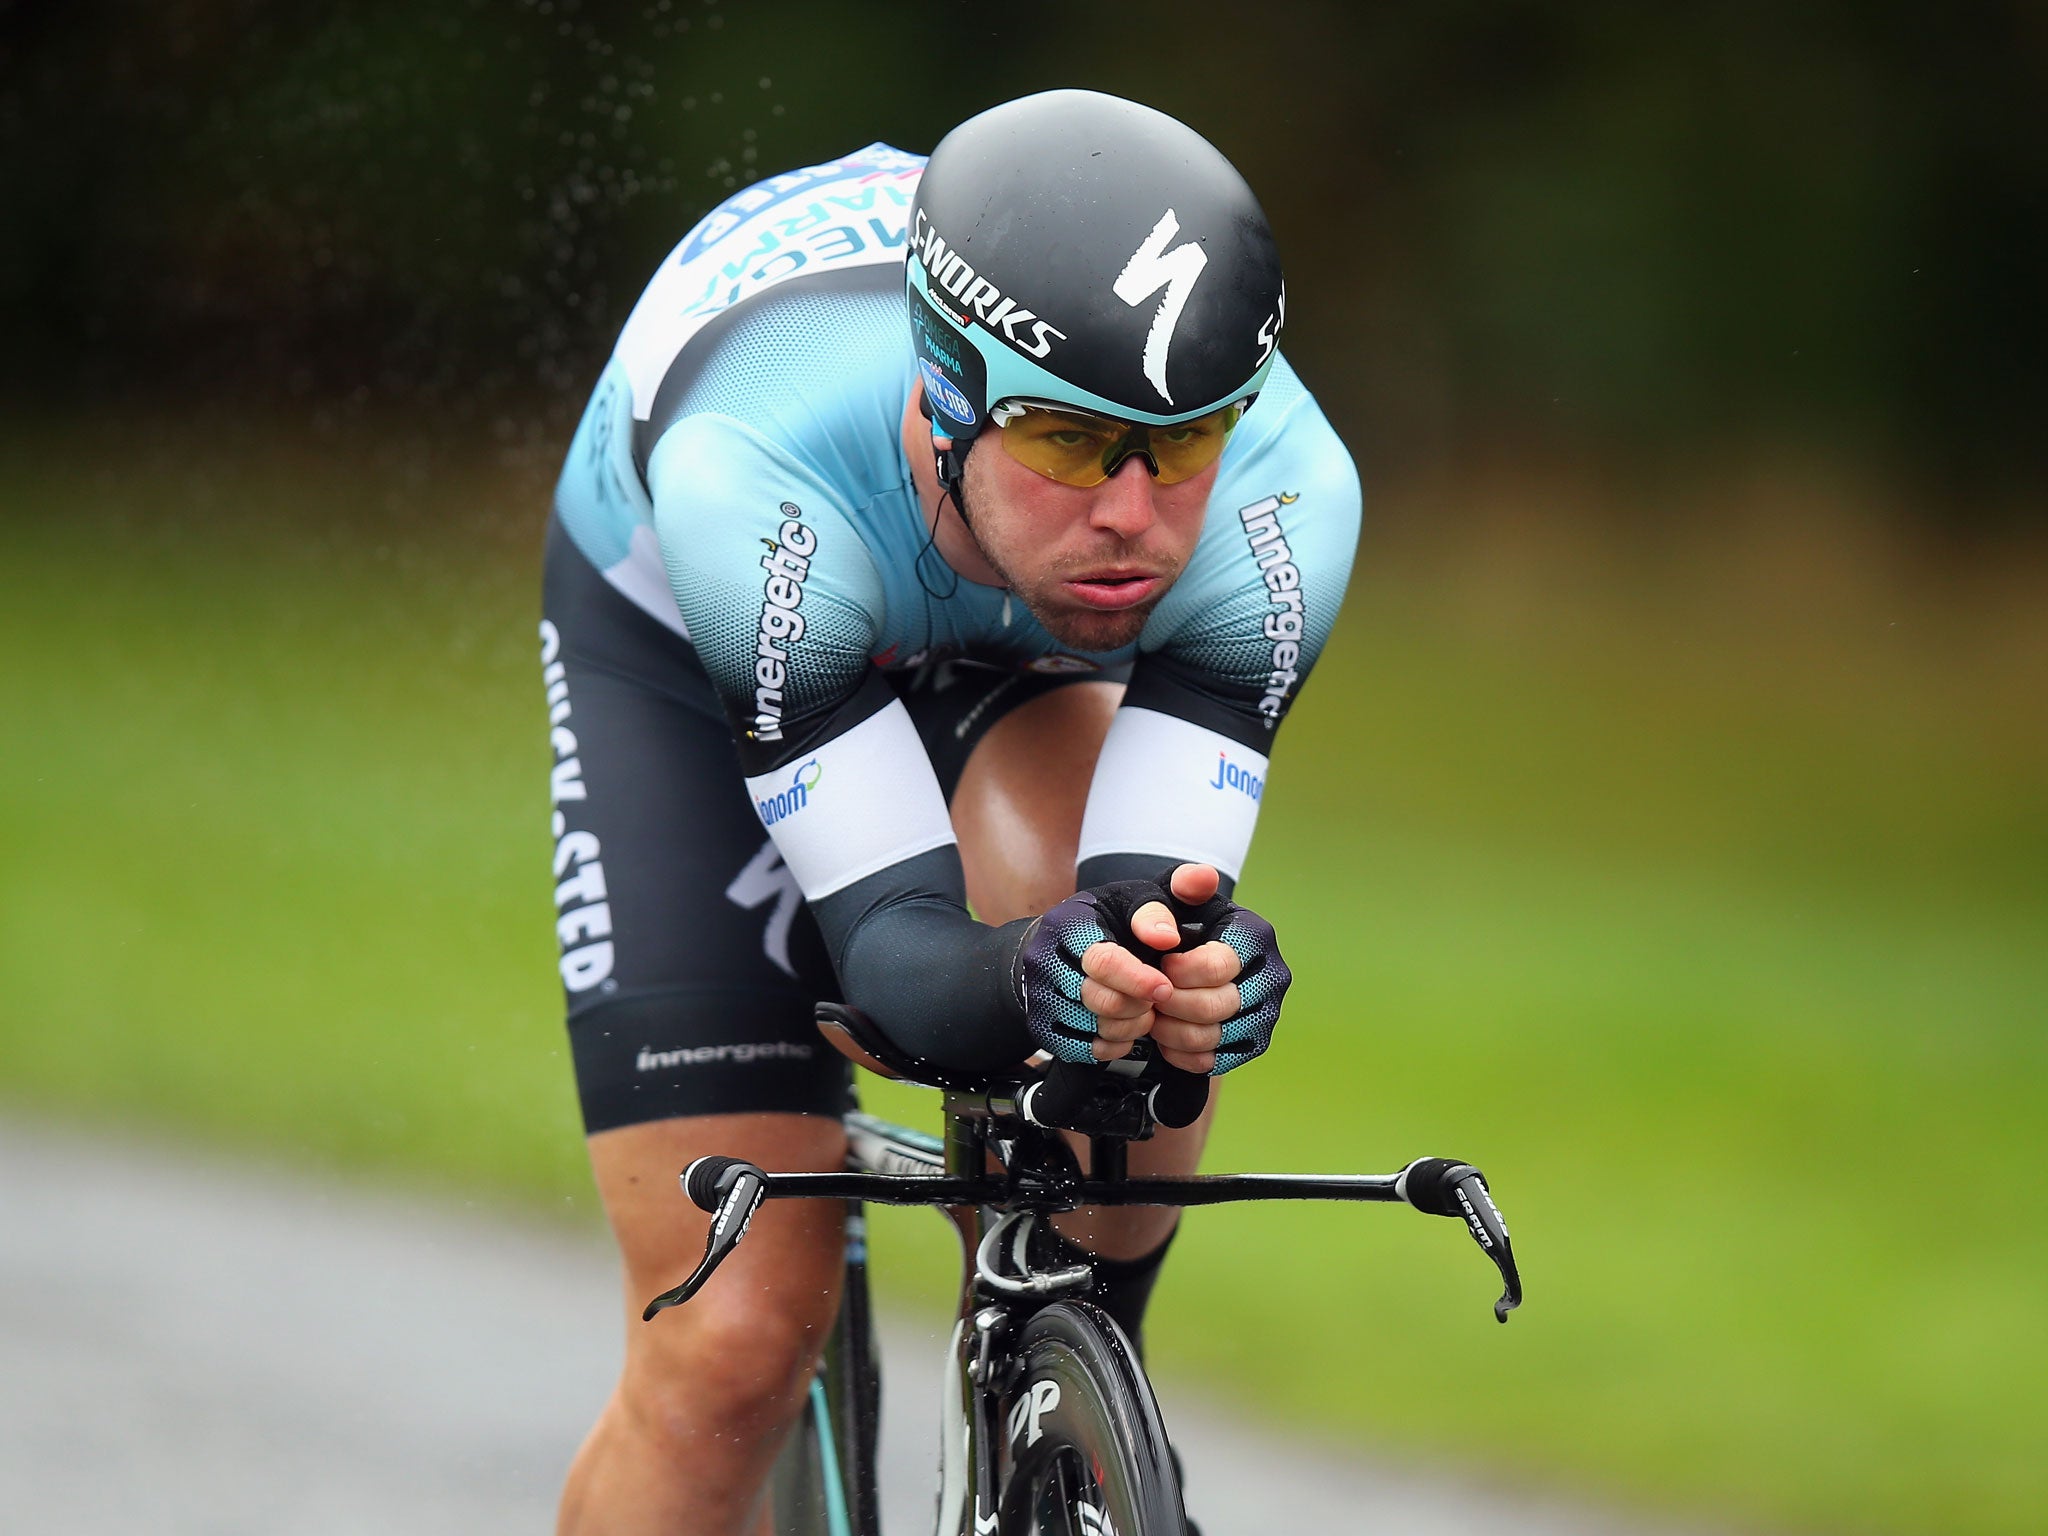 Mark Cavendish in action on the Tour of Britain